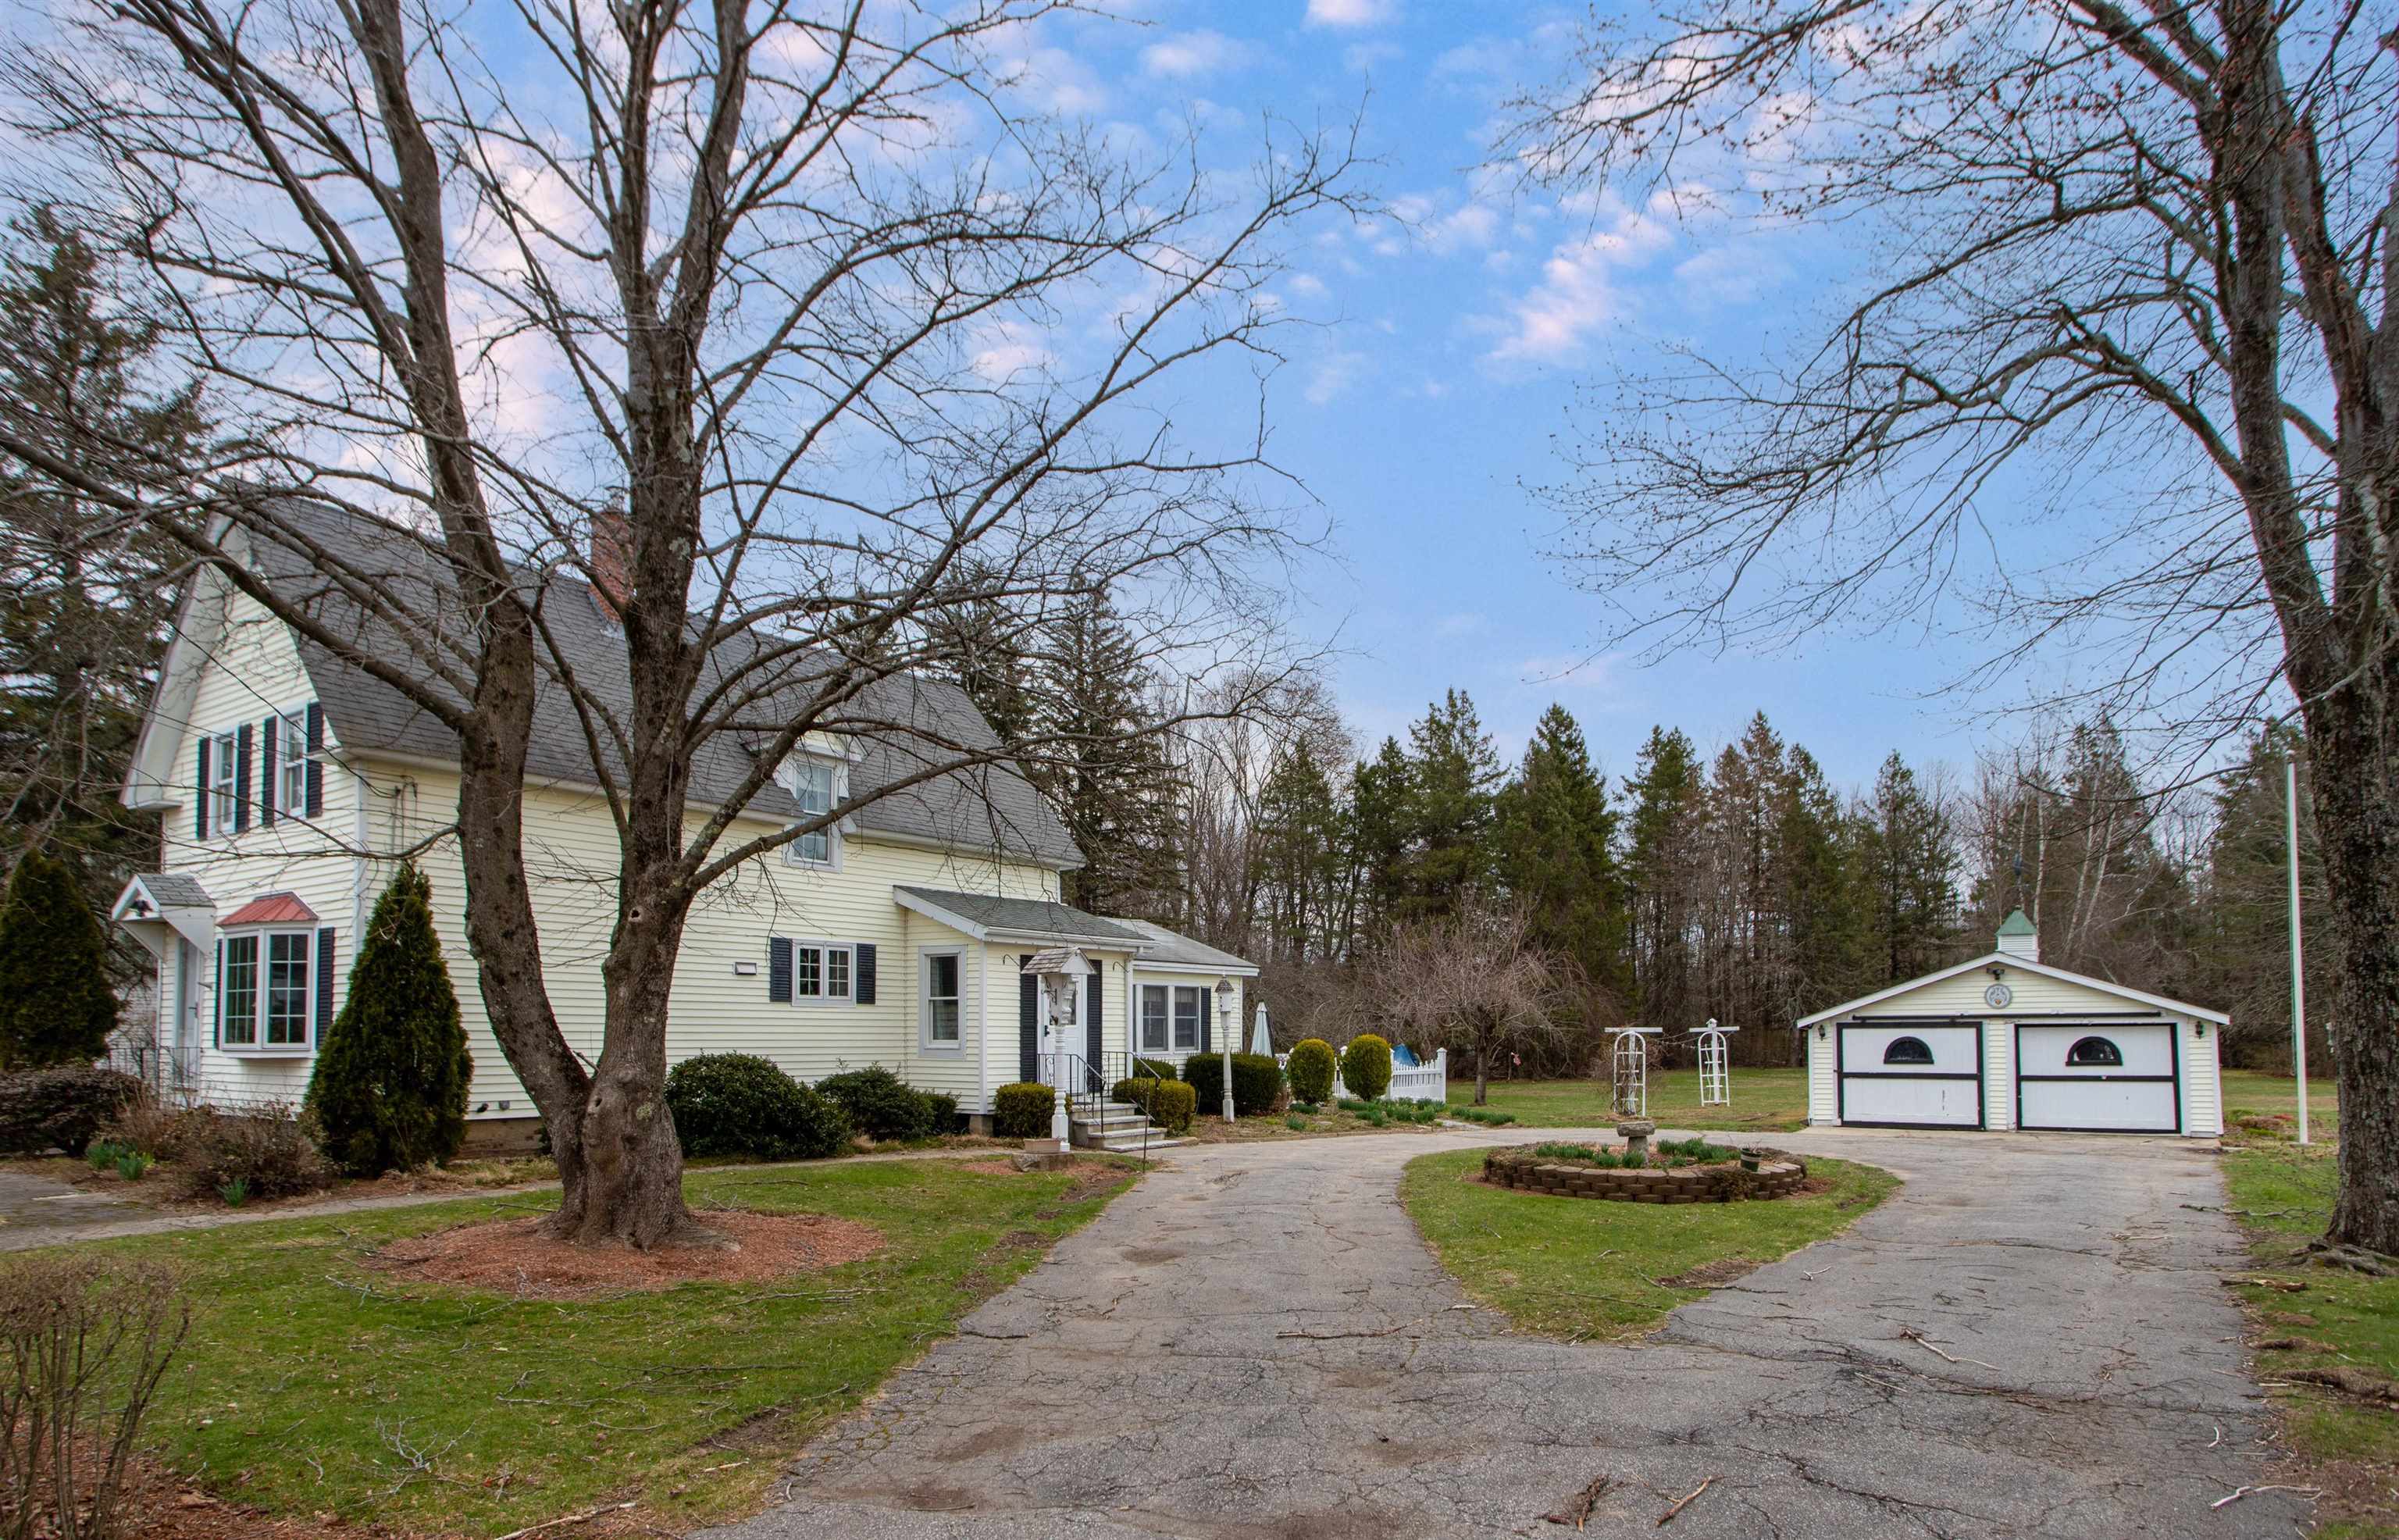 10 Acre Street, Epping, NH 